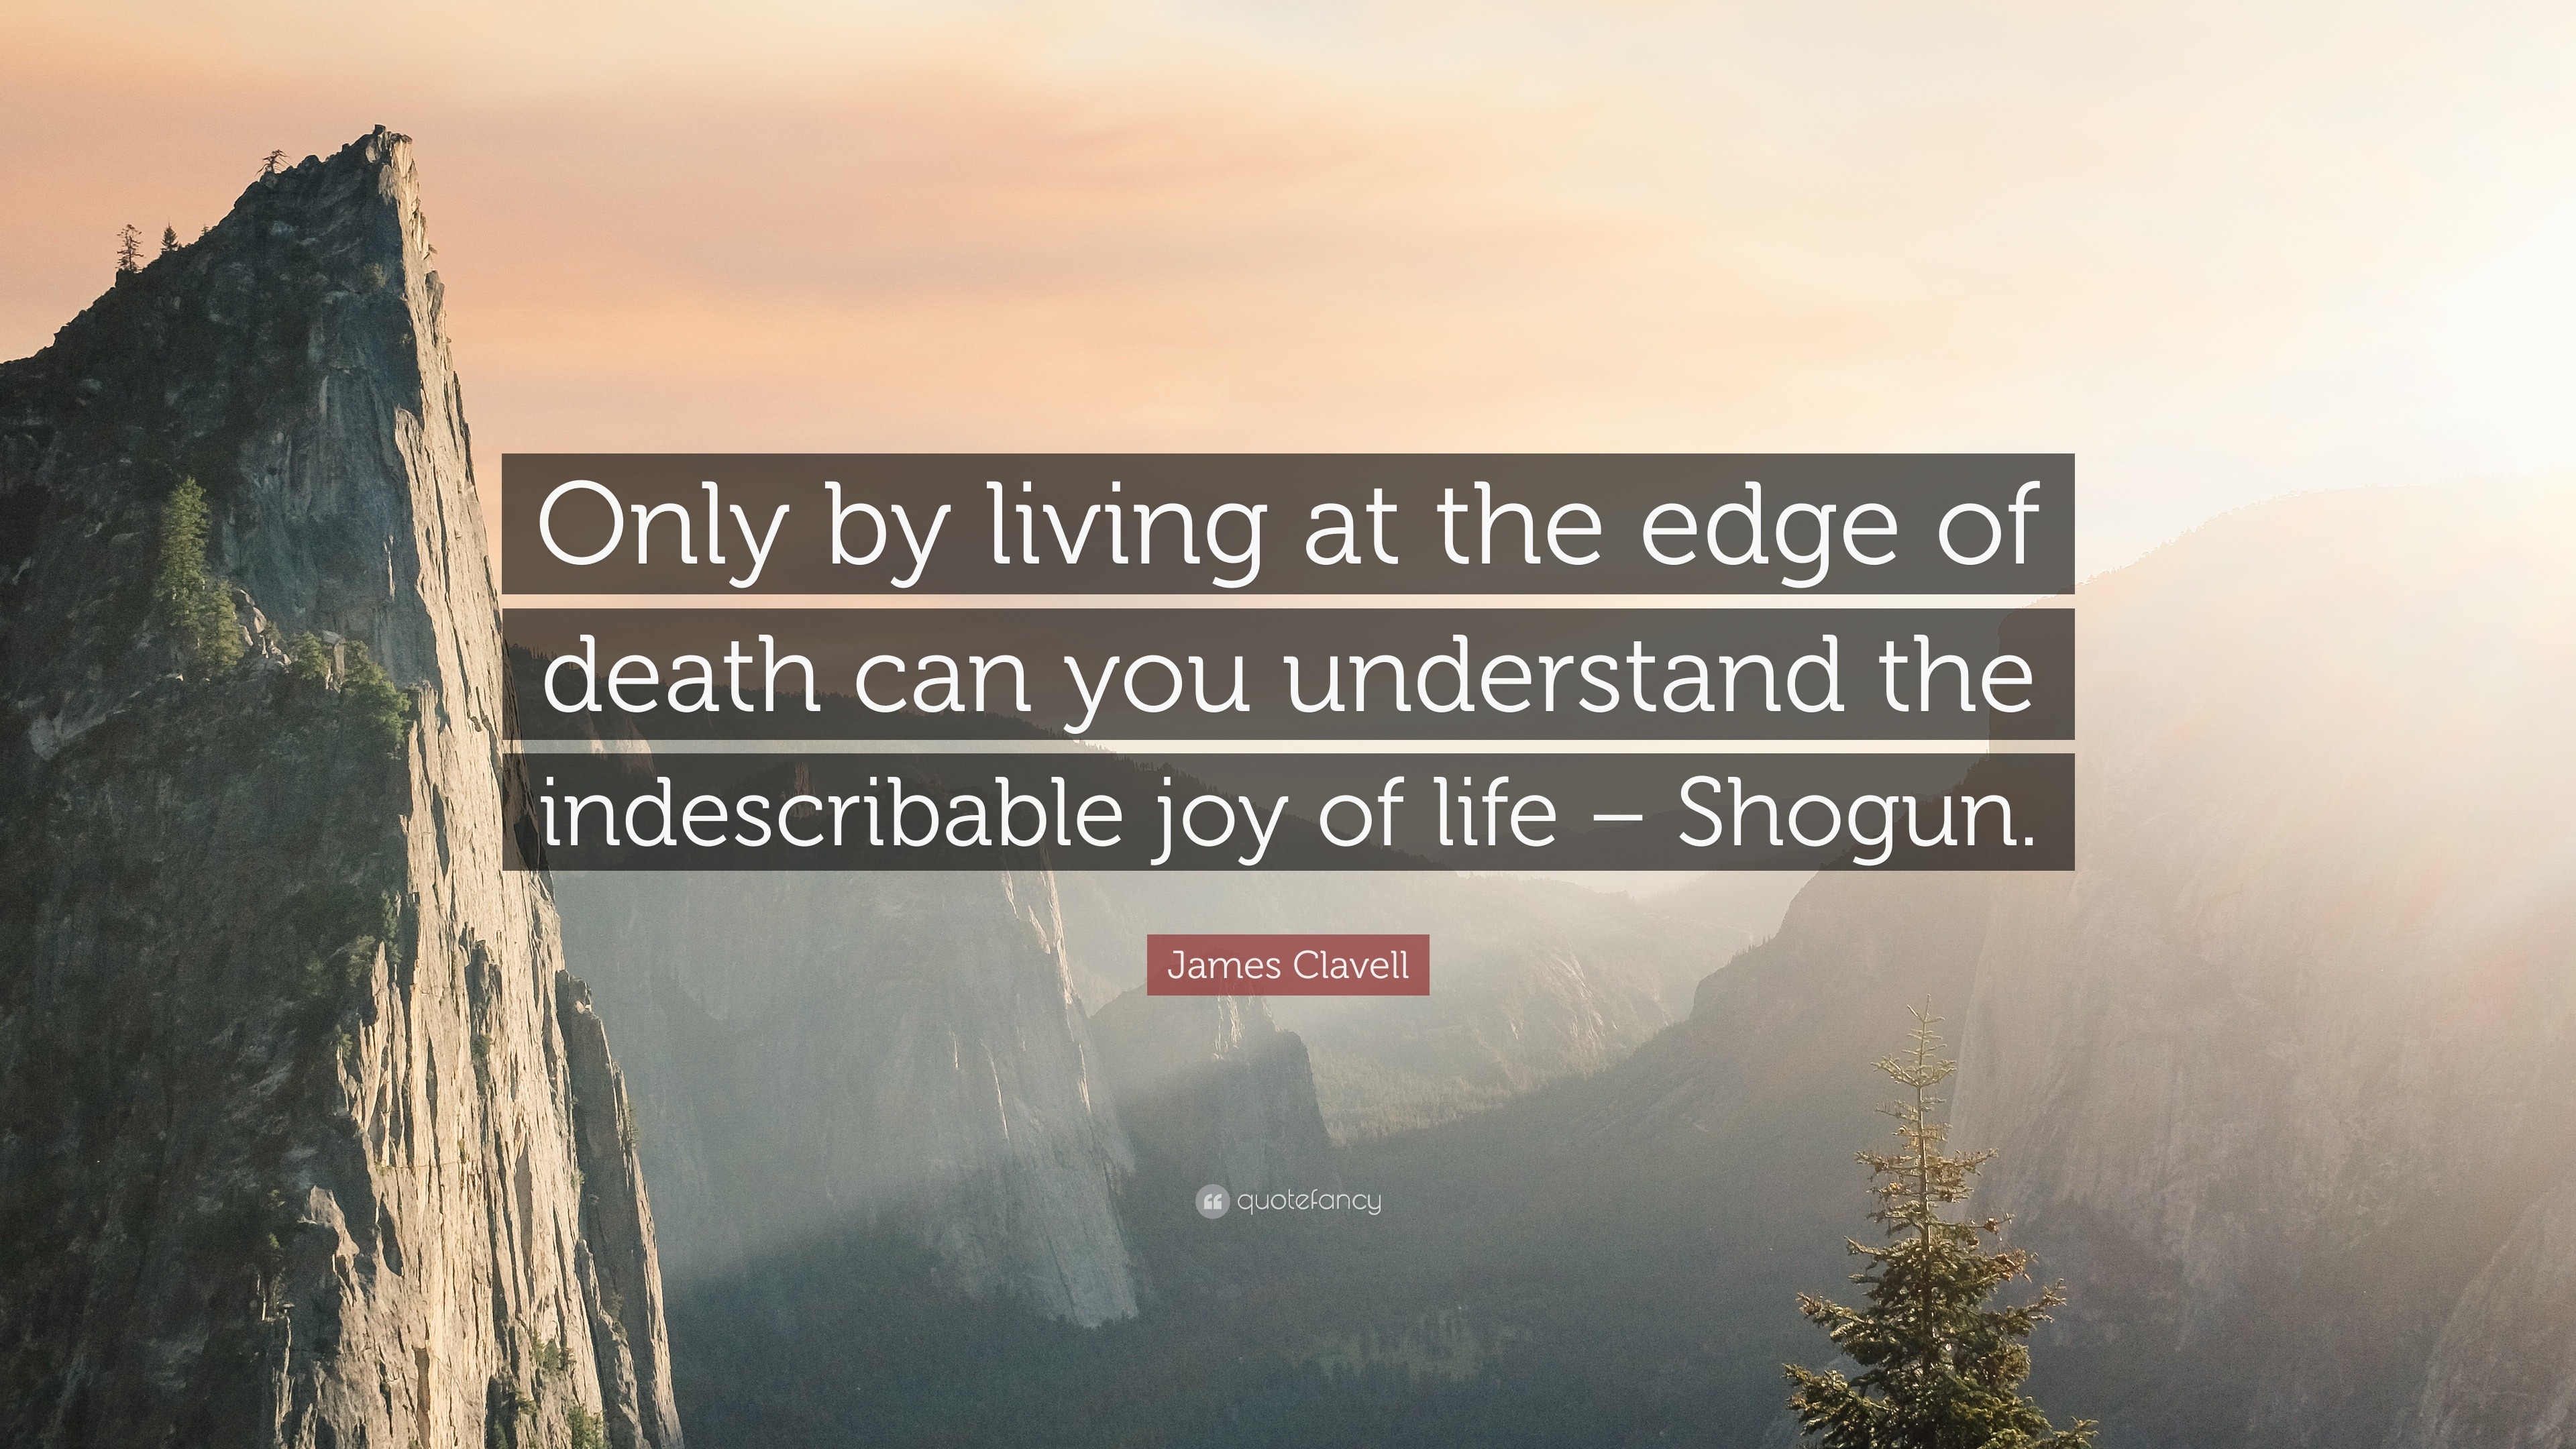 James Clavell Quote Only By Living At The Edge Of Death Can You Understand The Indescribable Joy Of Life Shogun 12 Wallpapers Quotefancy